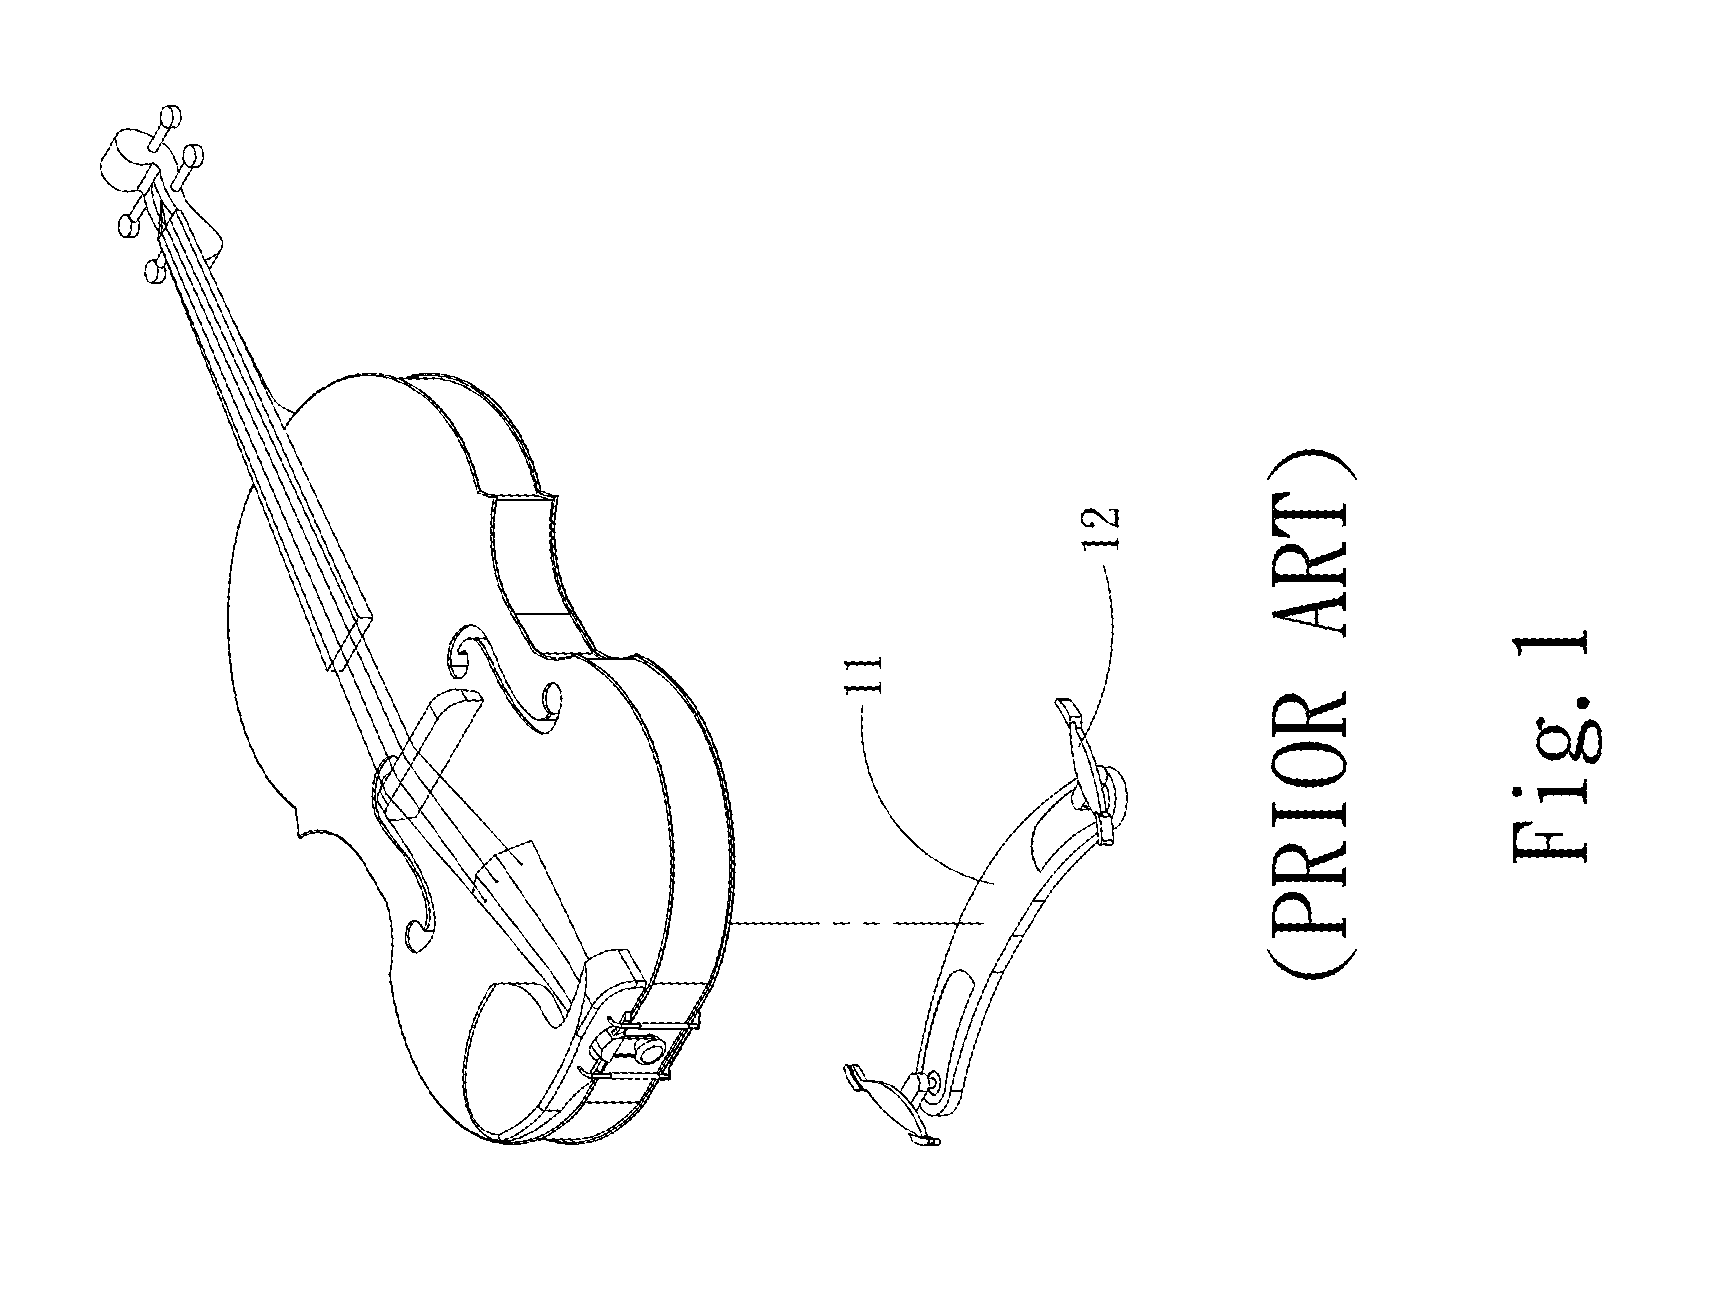 Clamping device for holding shoulder rest to violin and viola